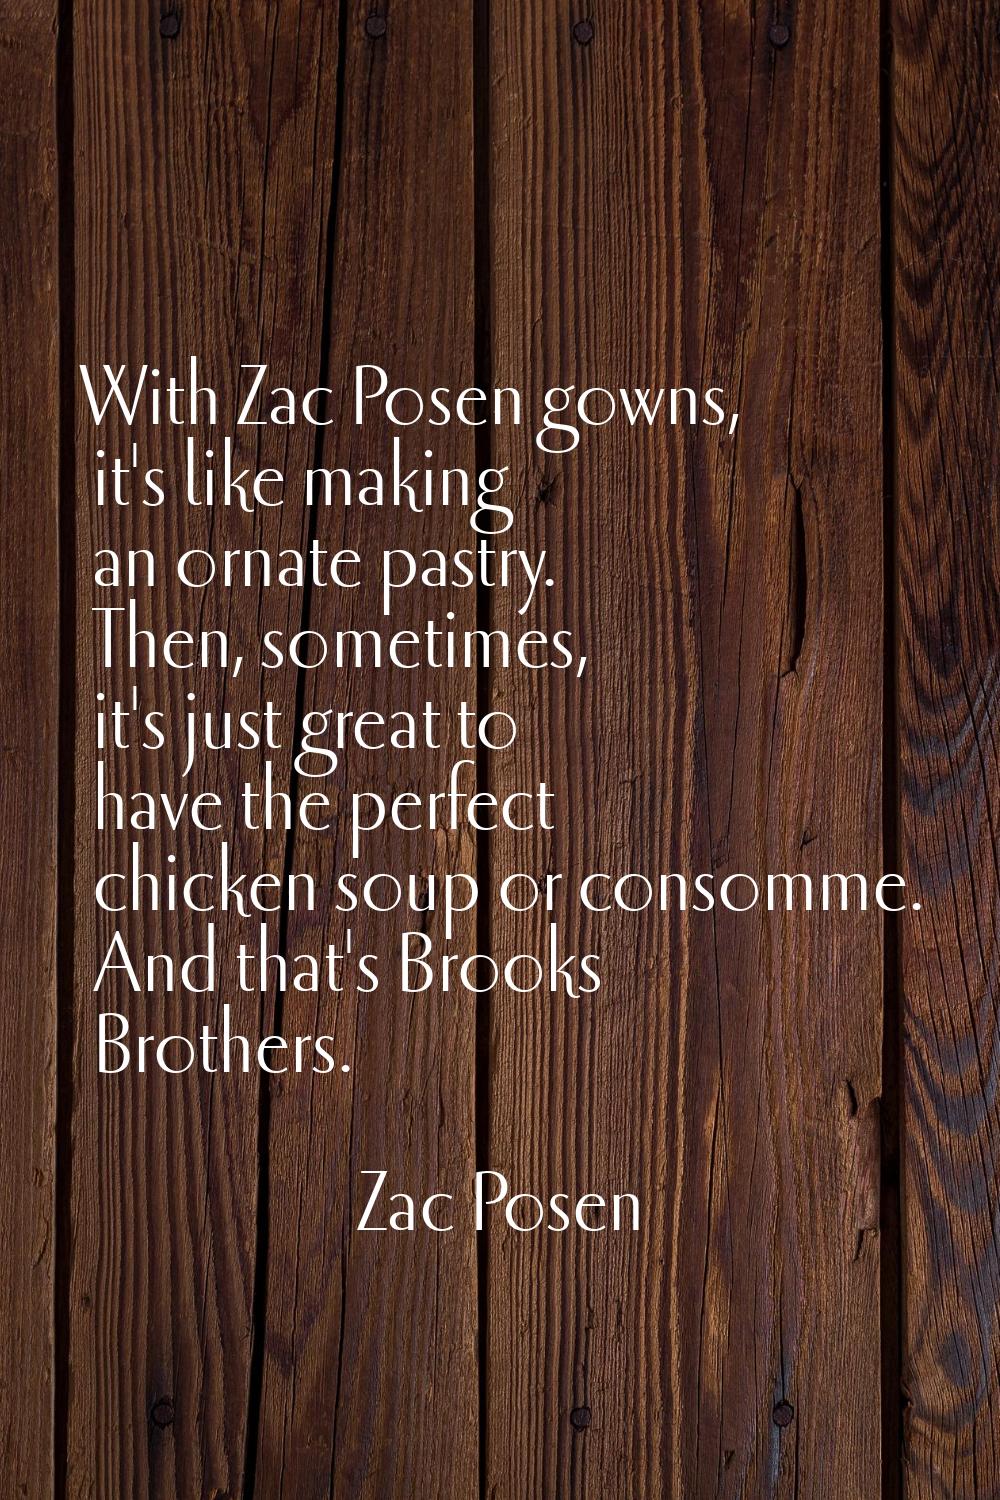 With Zac Posen gowns, it's like making an ornate pastry. Then, sometimes, it's just great to have t